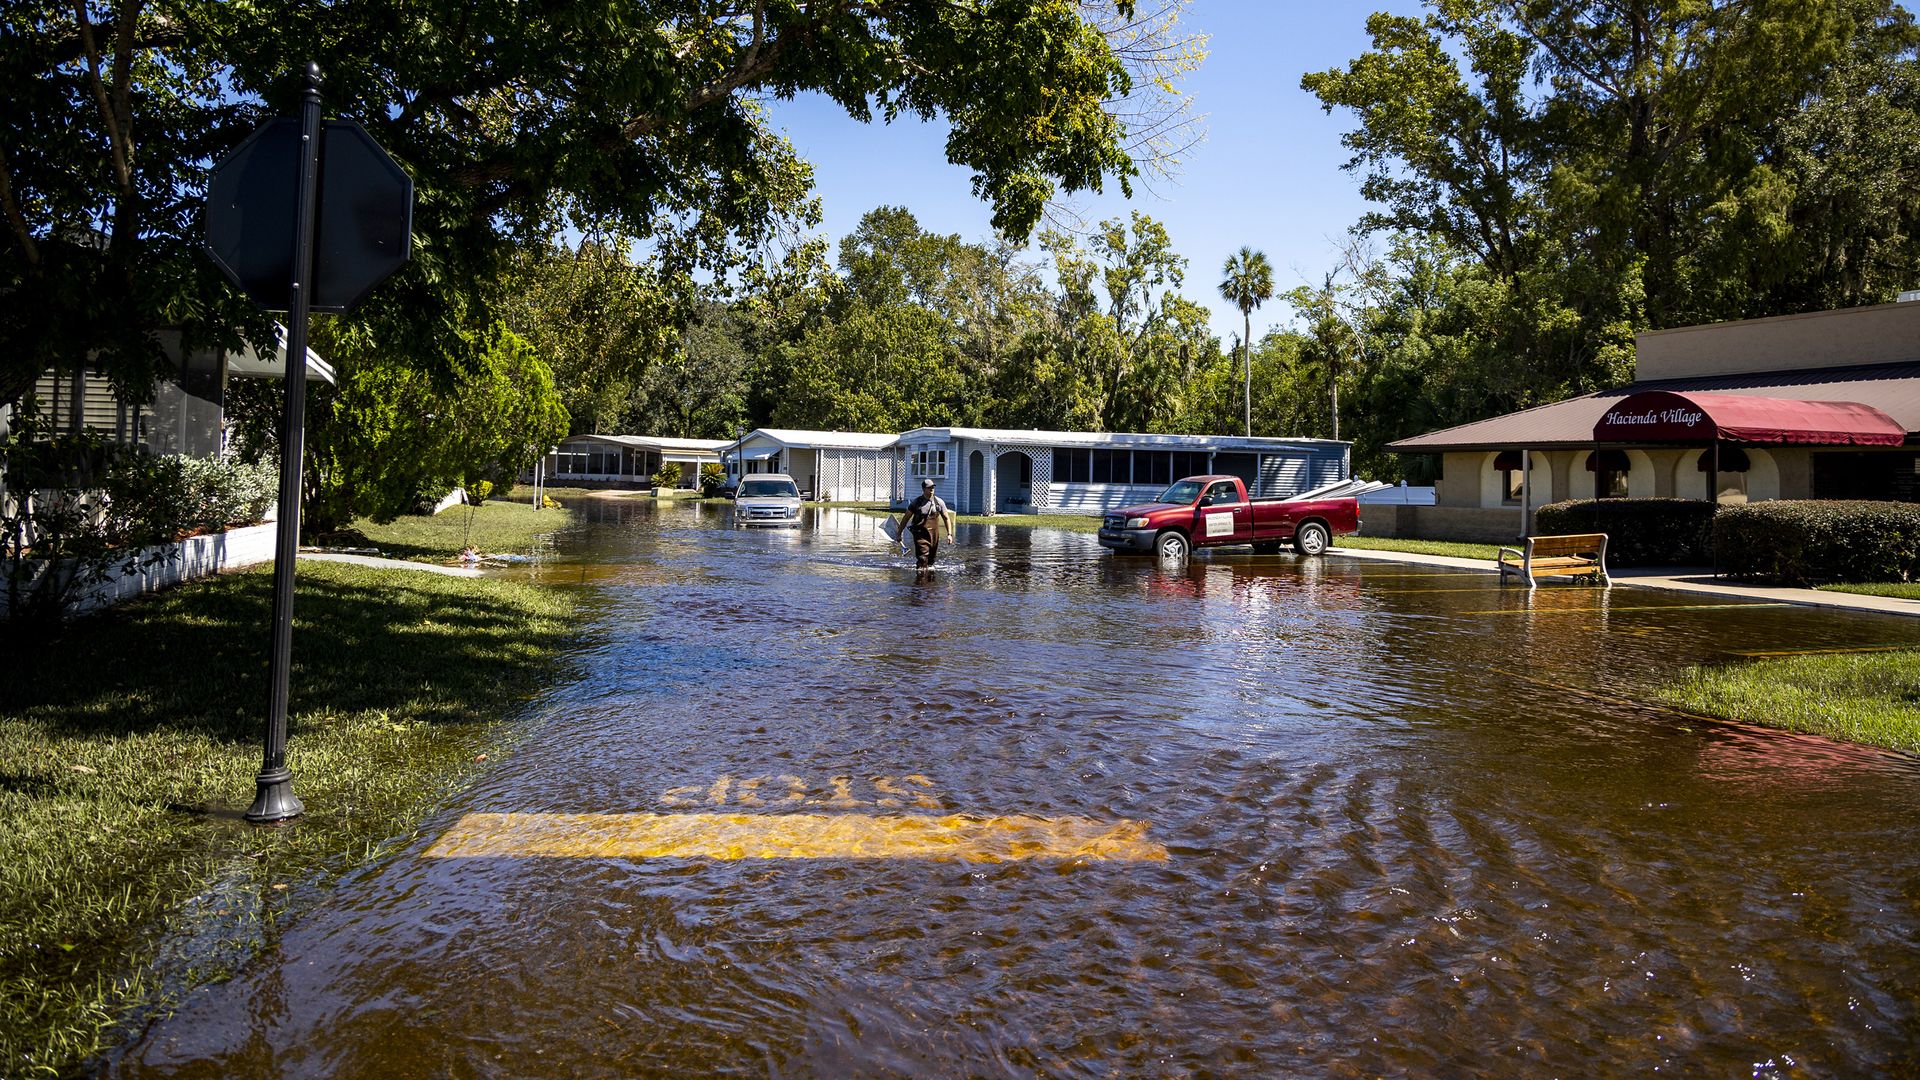 Hacienda Village, a 55-plus manufactured homes community in Winter Springs, Florida, saw major flooding from Hurricane Ian, with roadways still under water on Sunday, Oct. 2.